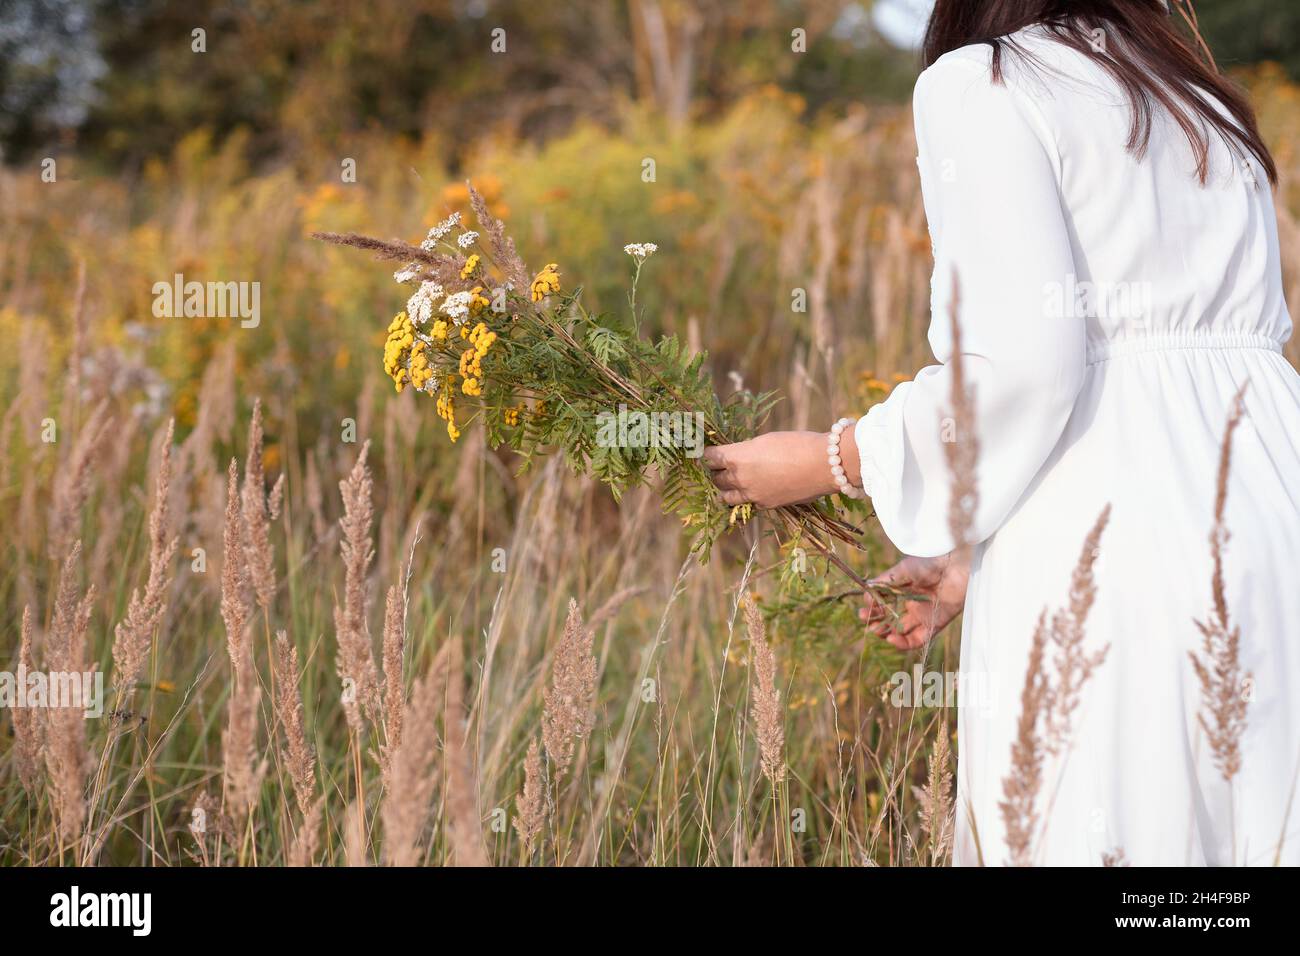 Woman holds a bouquet of wild flowers. A woman collecting flowers / herbs in nature. Copy-space. Stock Photo